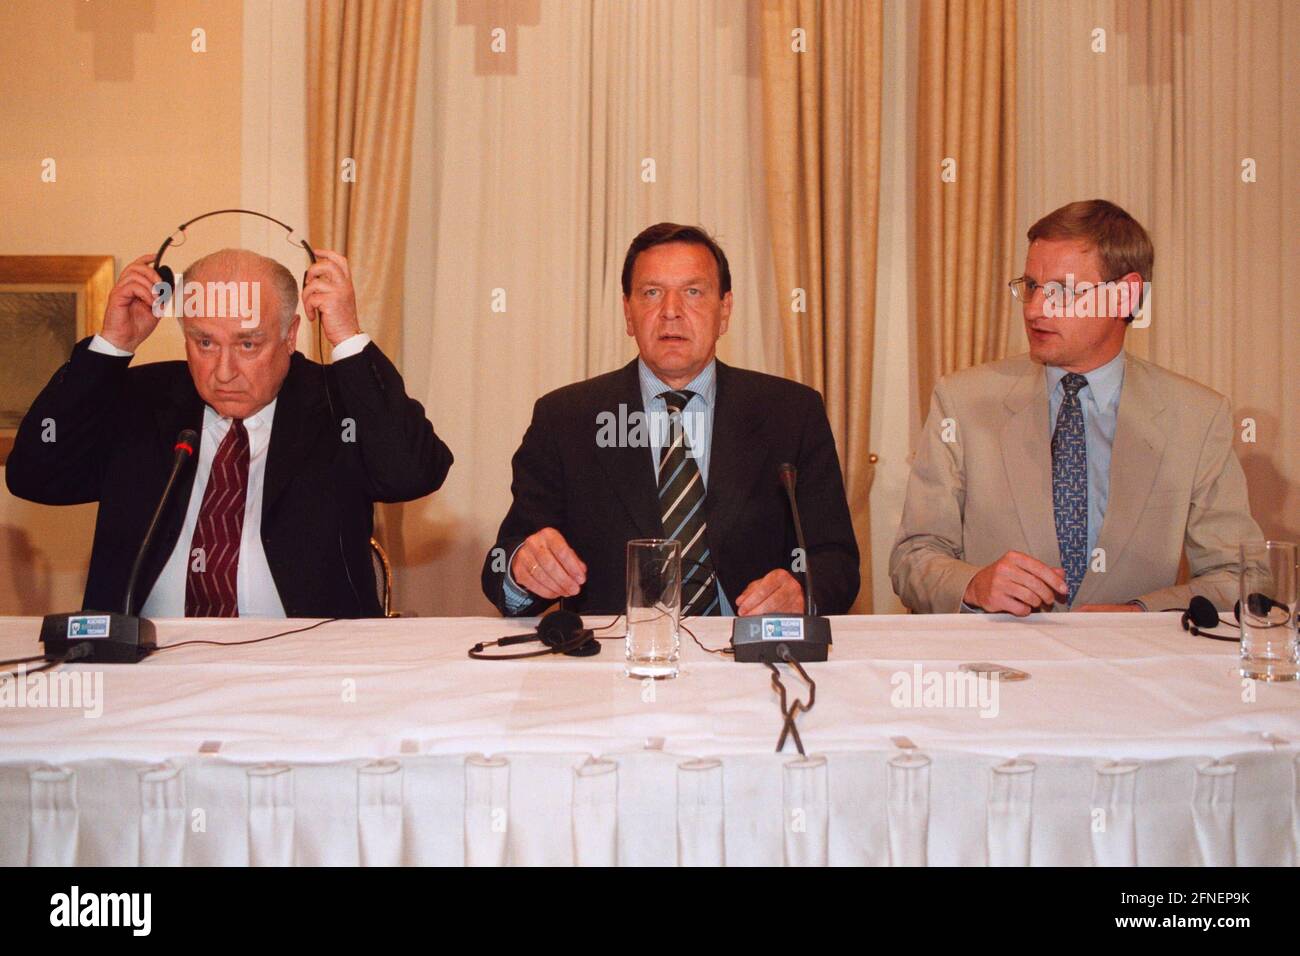 Viktor Chernomyrdin, the Russian government's envoy to Yugoslavia, German Chancellor Gerhard Schröder and Carl Bildt, the United Nations Secretary-General's special envoy for Kosovo, during a press conference on the talks on the situation in Kosovo at the Petersberg guesthouse in Königswinter. [automated translation] Stock Photo